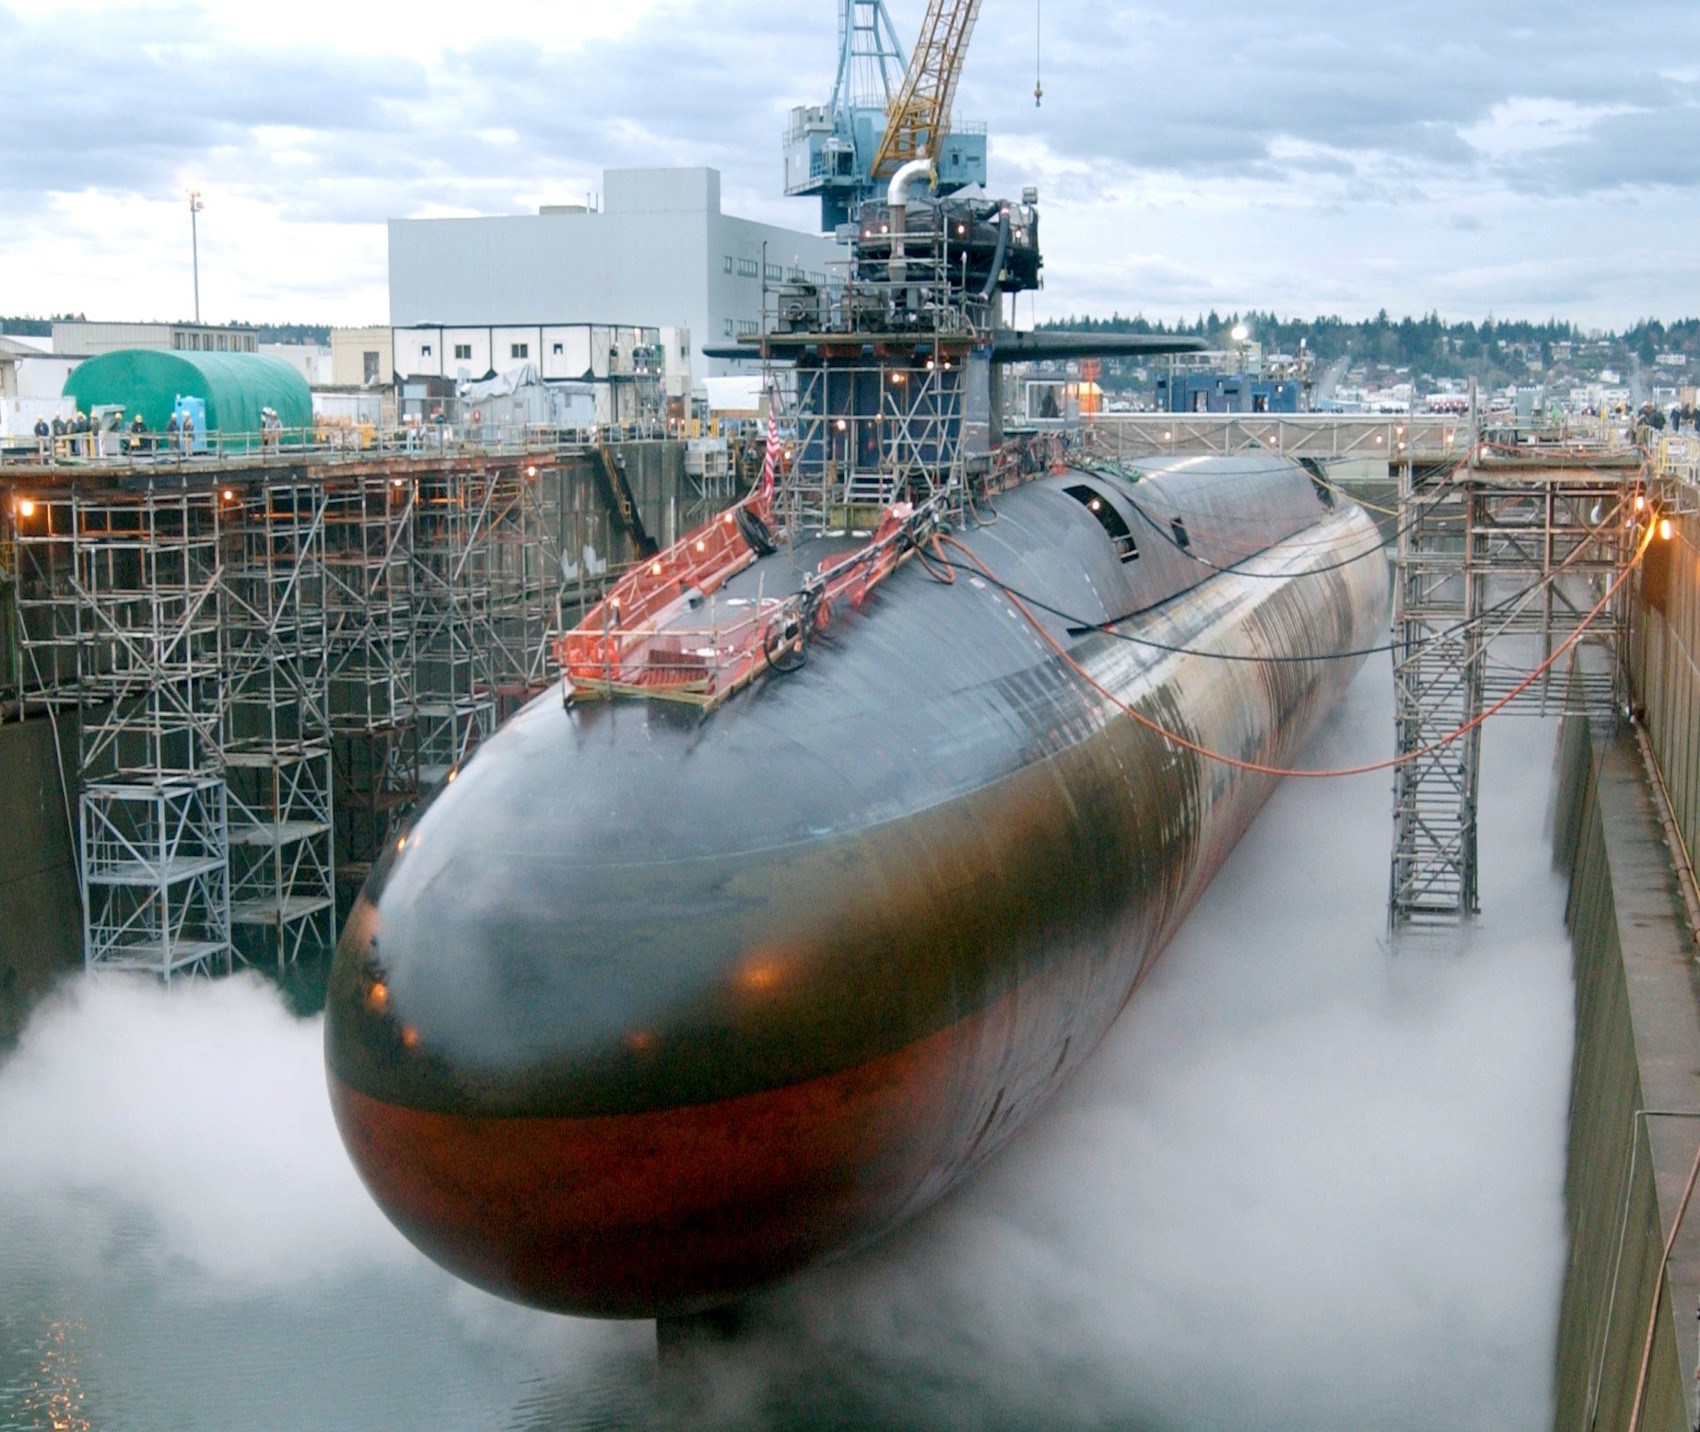 ssgn-726 uss ohio guided missile submarine us navy 2003 56 puget sound naval shipyard bremerton conversion